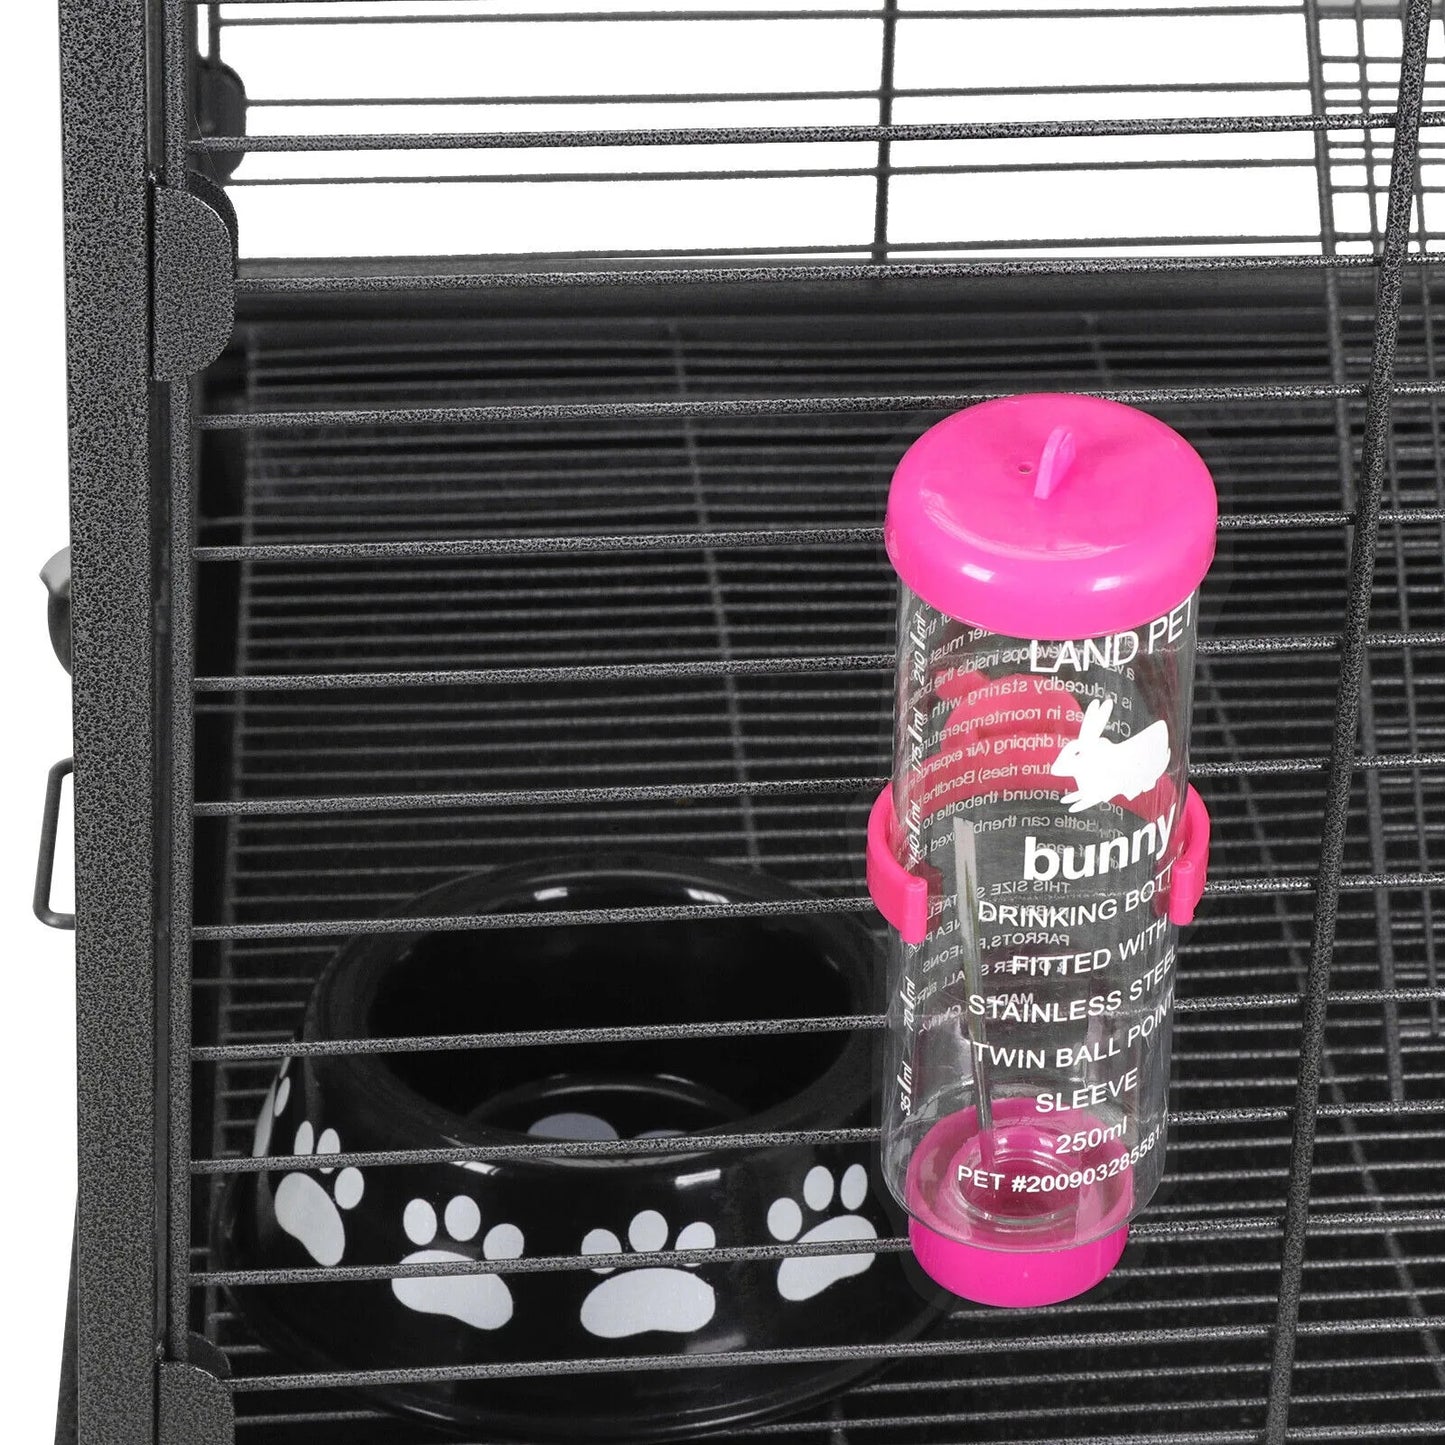 Free shipping US Ferret Cage Rabbit Chinchilla Rat Cage Small Animal House 37" 4 Levels